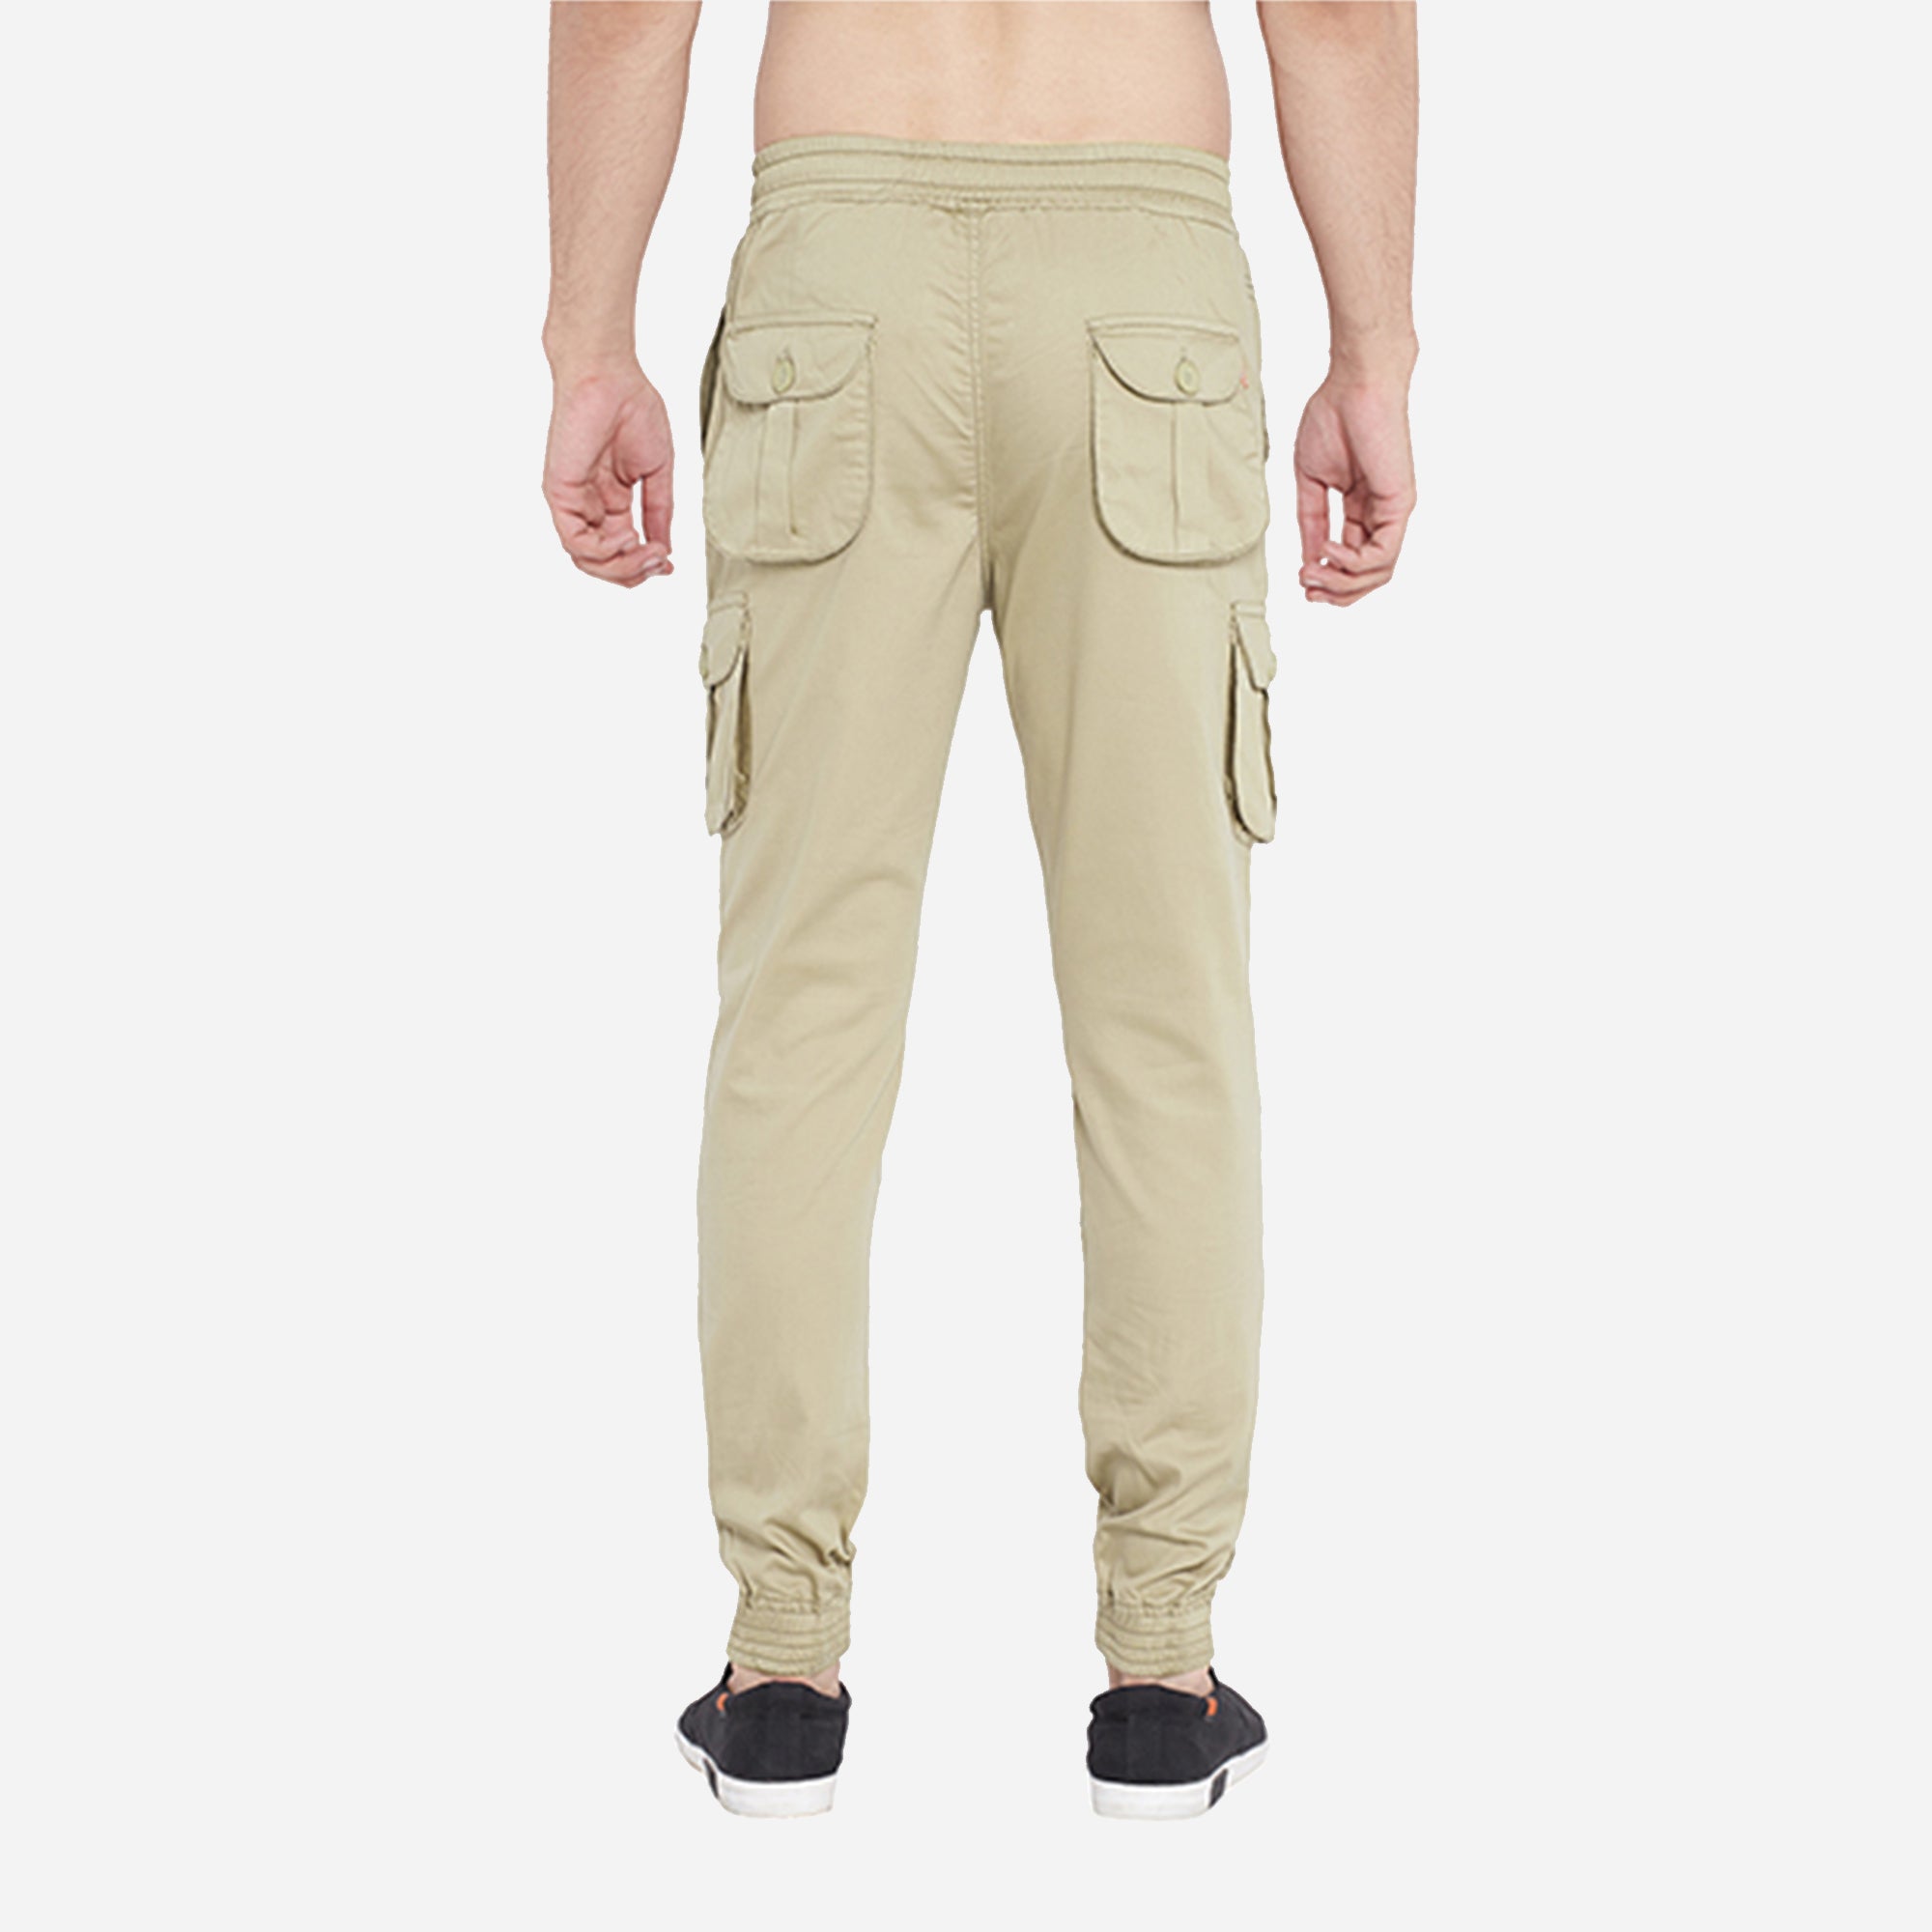 TECH TAPERED JOGGER PANTS